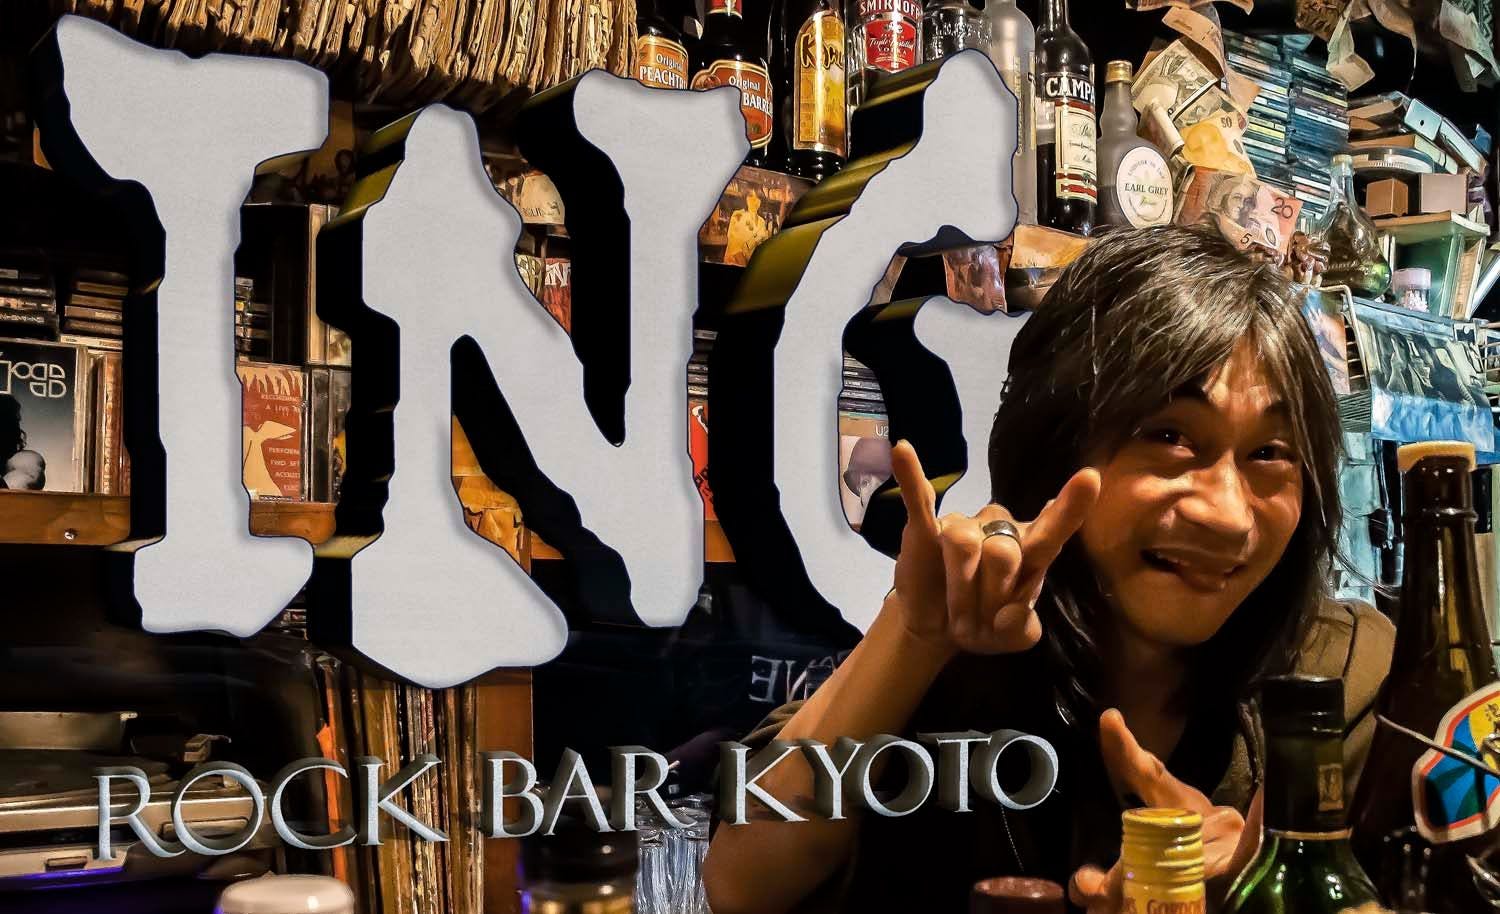 Rock Bar ING Kyoto: Where Kyoto’s Locals Hangout